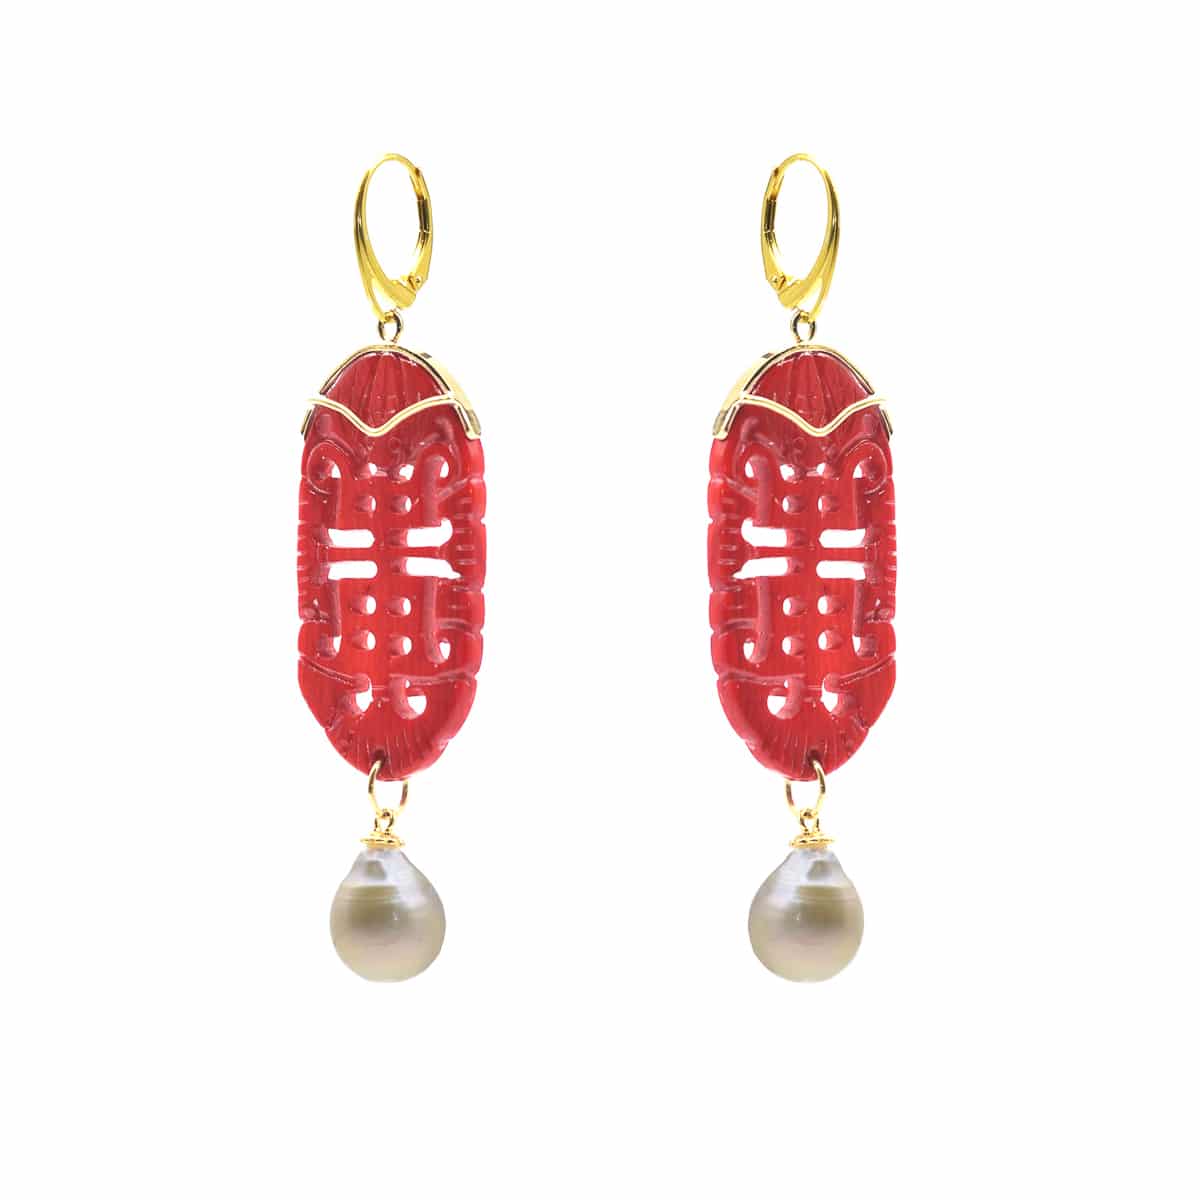 HONG BOCK design earrings made of red bamboo corals and pearls